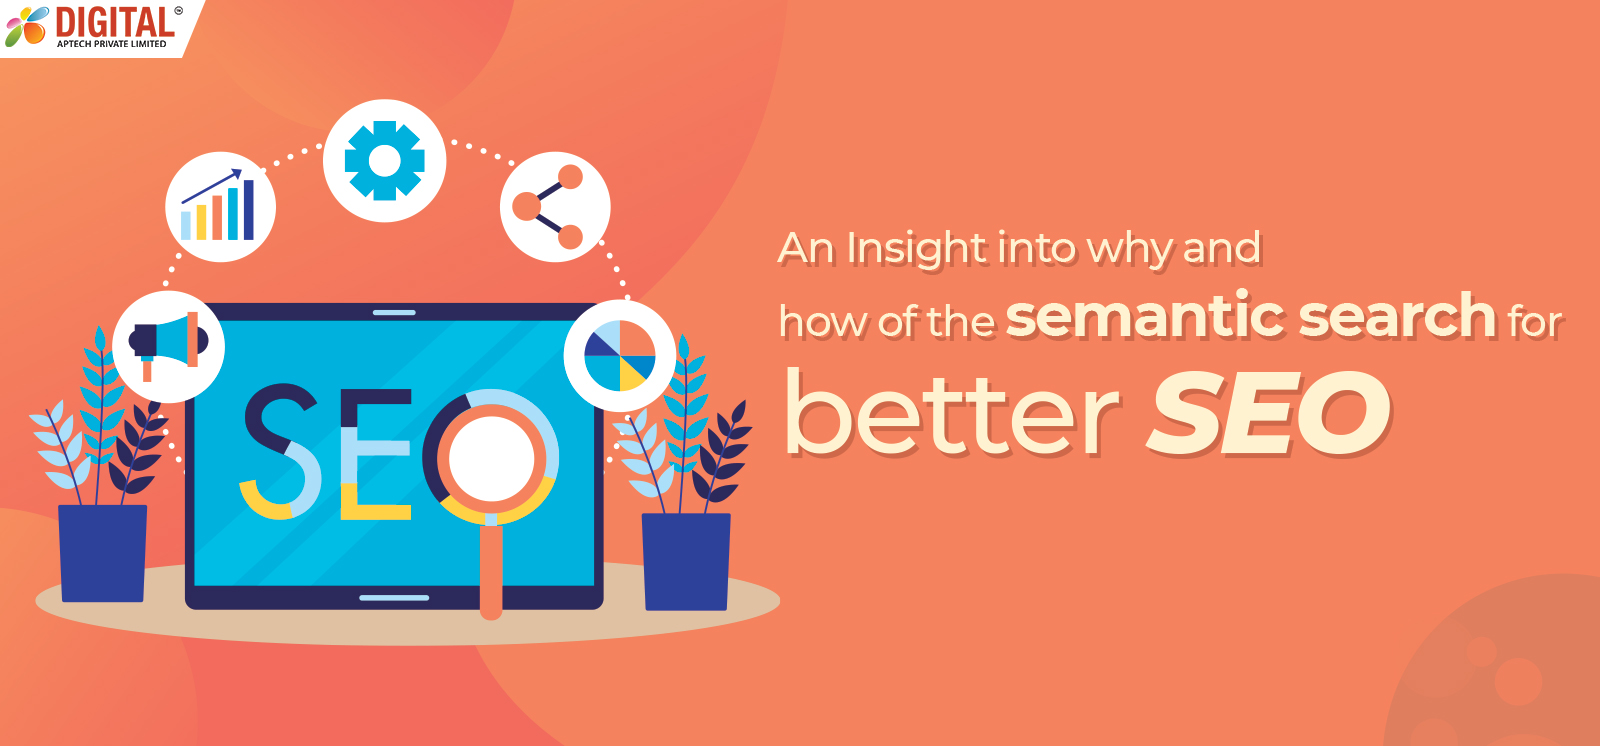 An Insight into why and how of the semantic search for better SEO